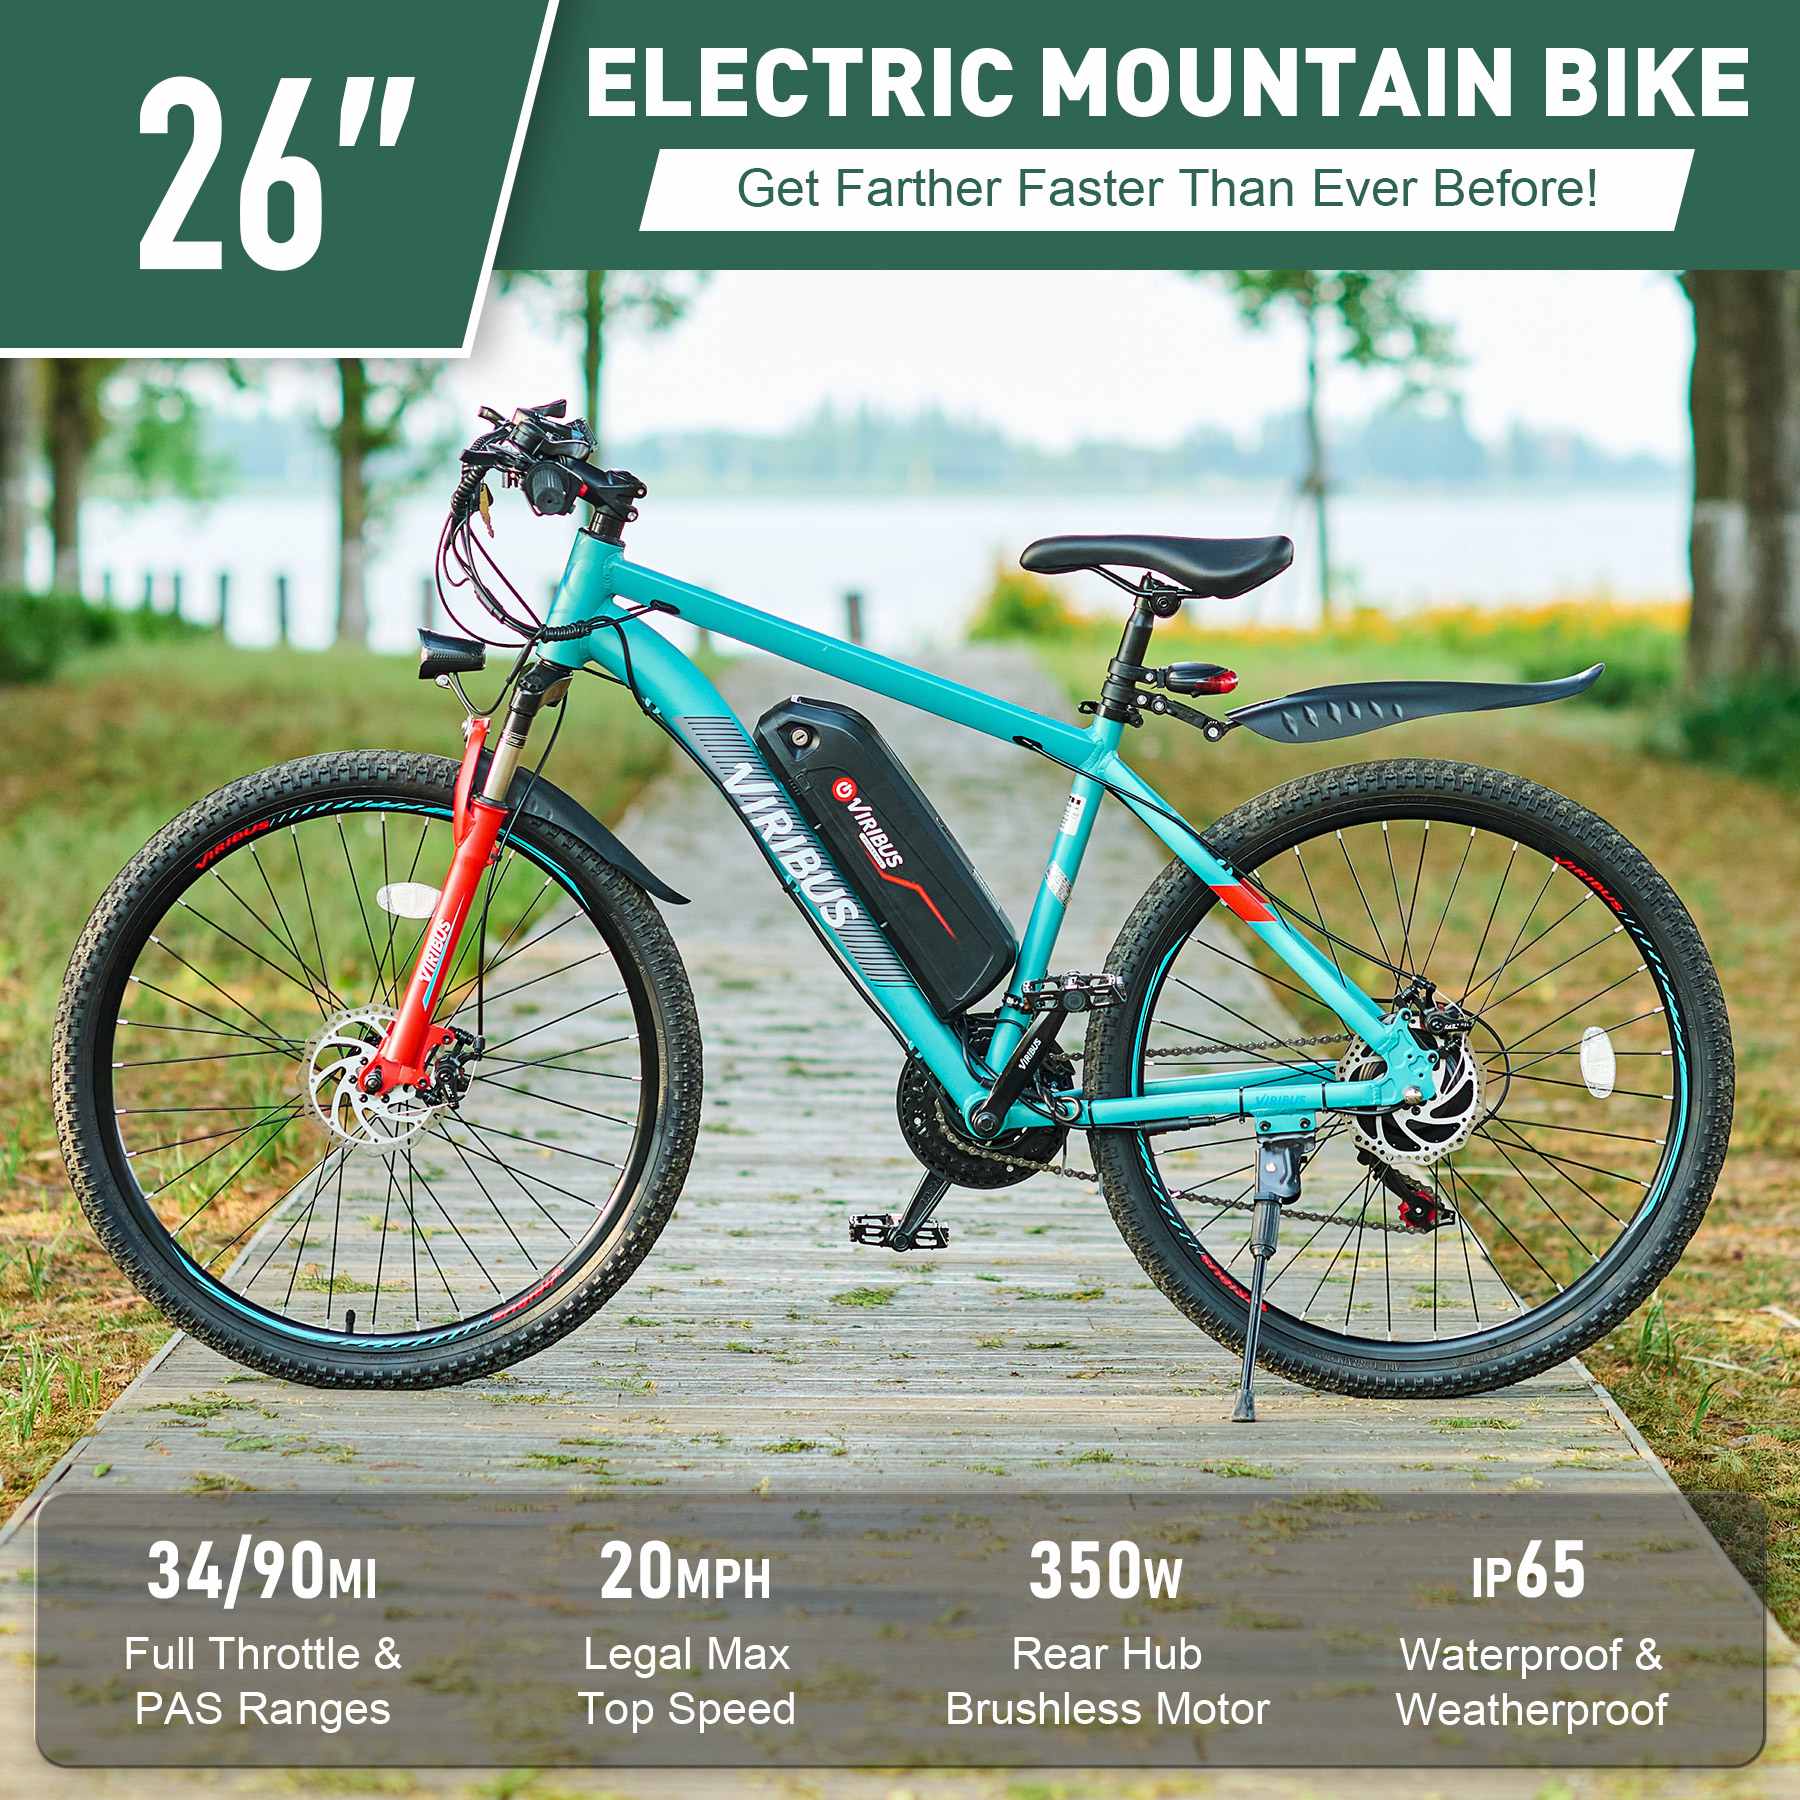 Black Friday Electric Mountain Bike For Sale Best Prices Viribus